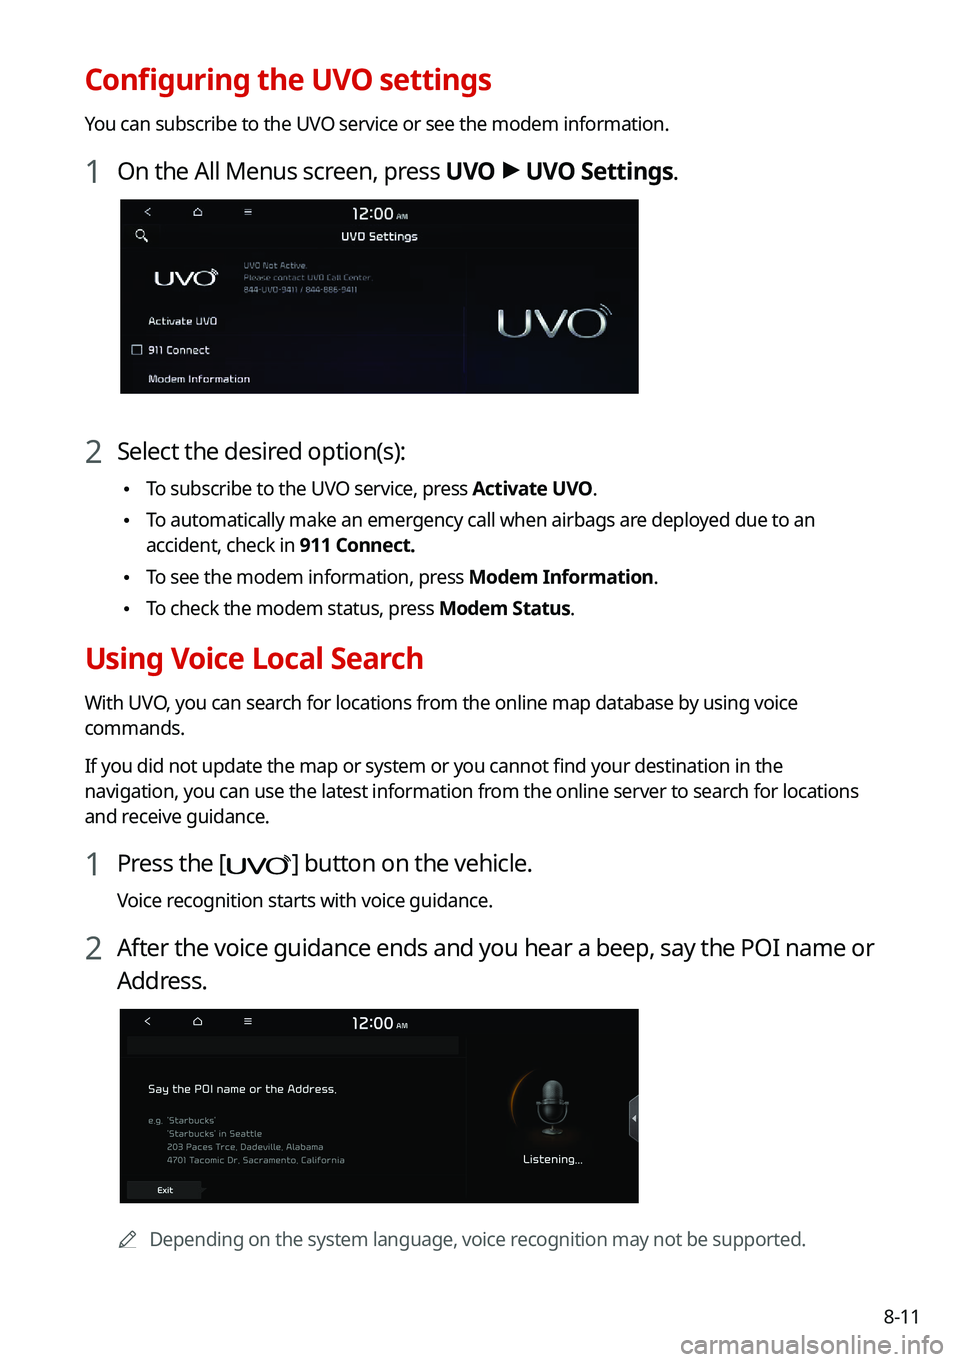 KIA SOUL 2022  Navigation System Quick Reference Guide 8-11
Configuring the UVO settings
You can subscribe to the UVO service or see the modem information.
1 On the All Menus screen, press UVO >
 UVO Settings.
2 Select the desired option(s):
 \225 To subs